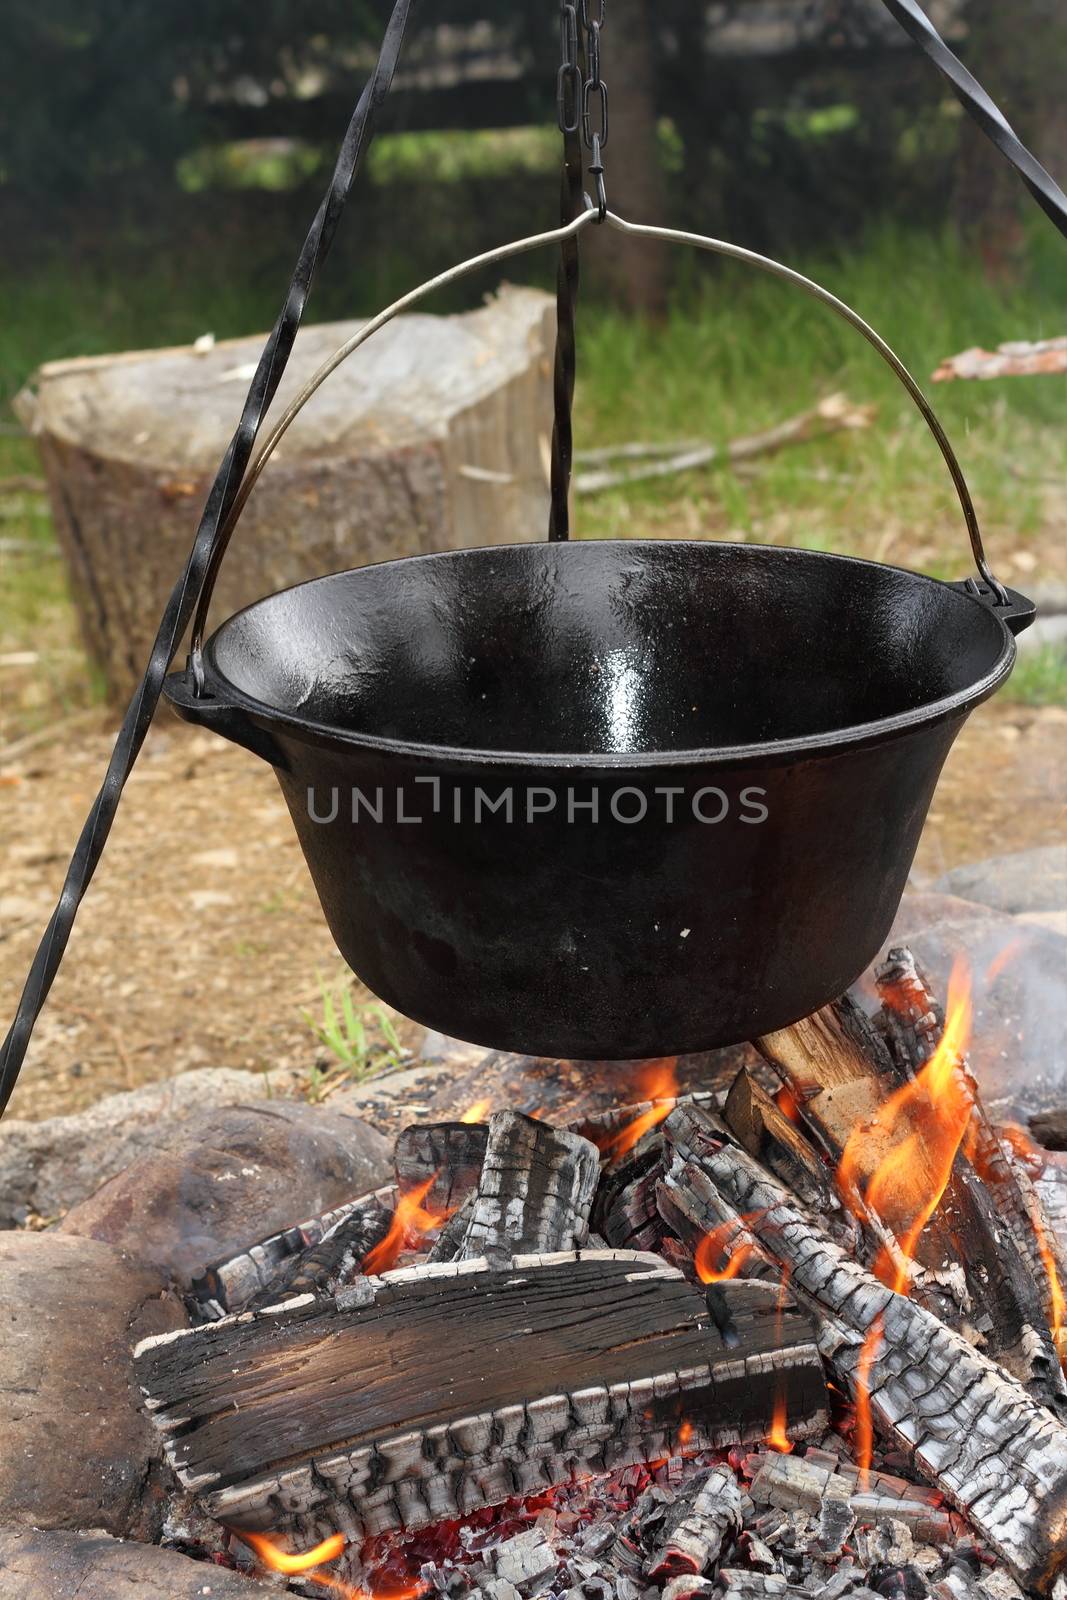 healthy cooking on ancient traditional big metal pot ( vintage black cauldron ) on camp fire